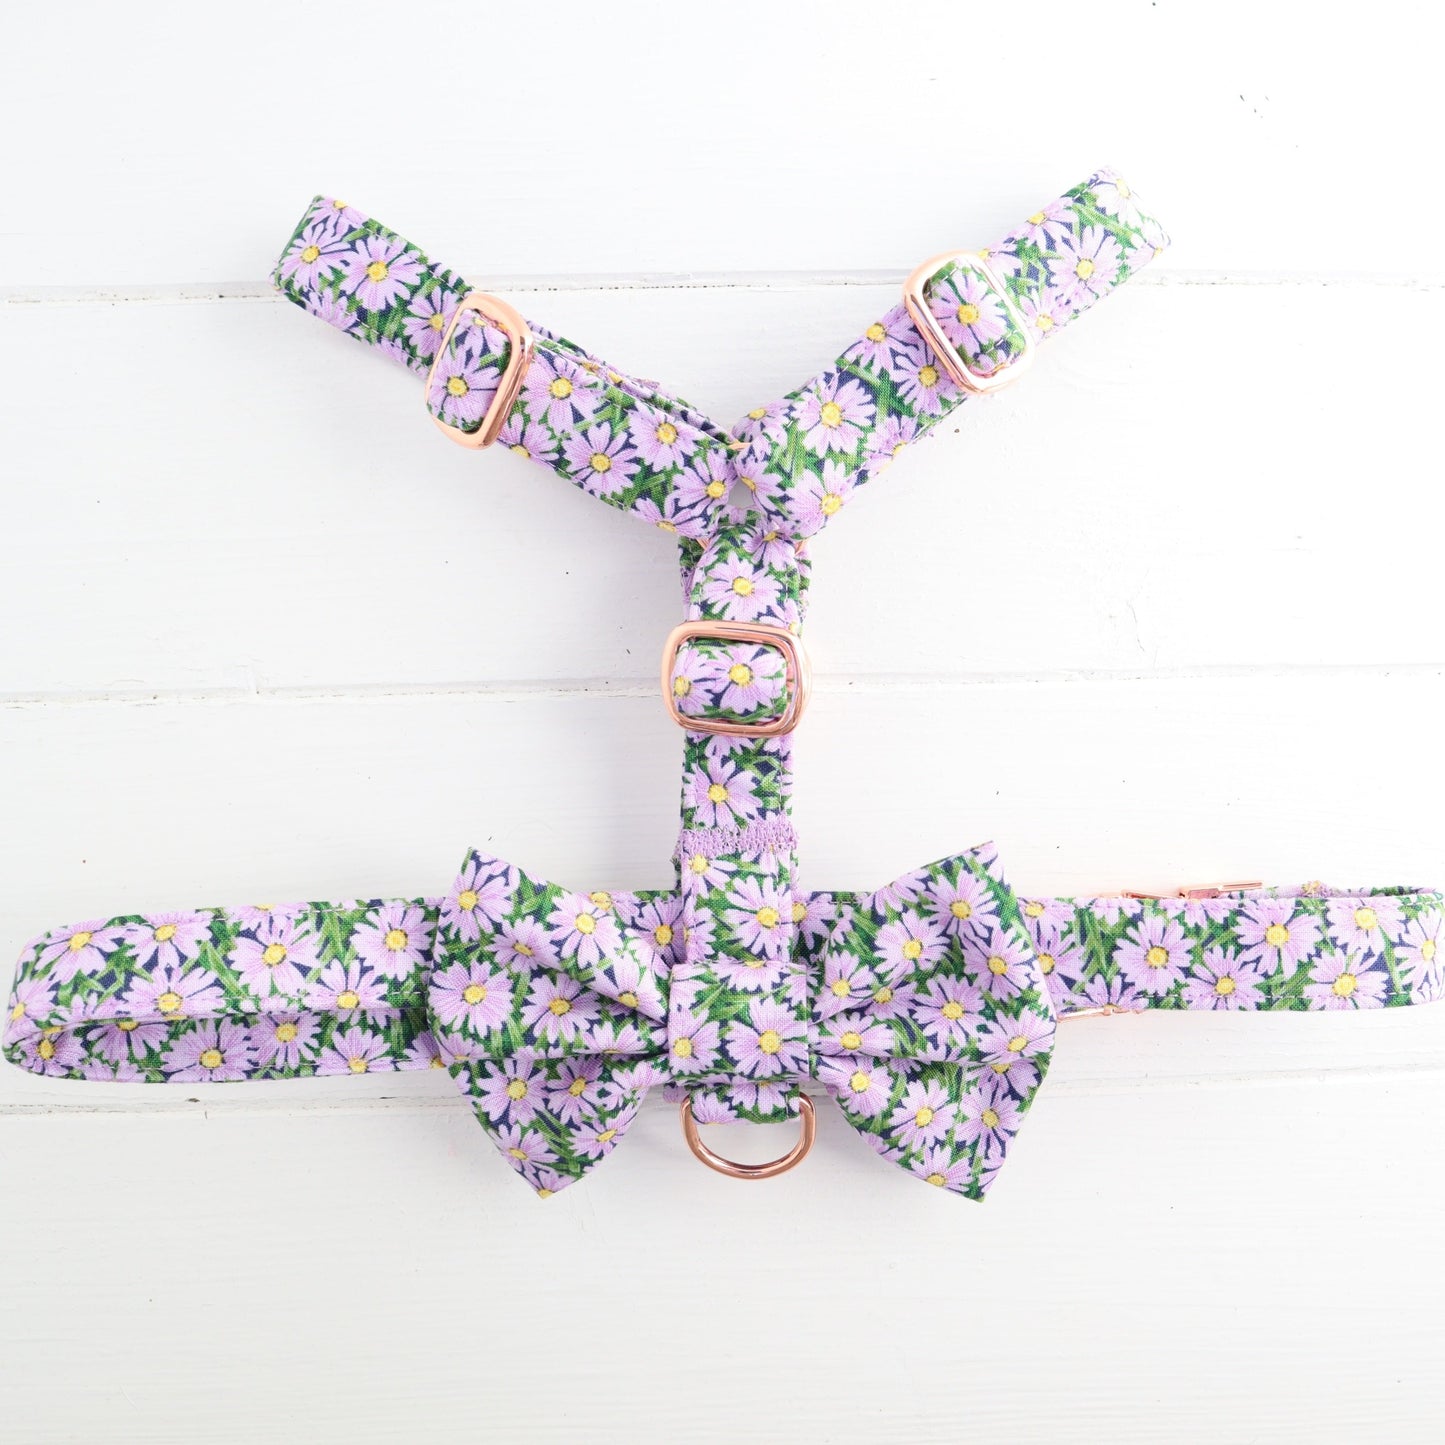 Dog Harness in Summer Lilac Purple Daisy Floral Design